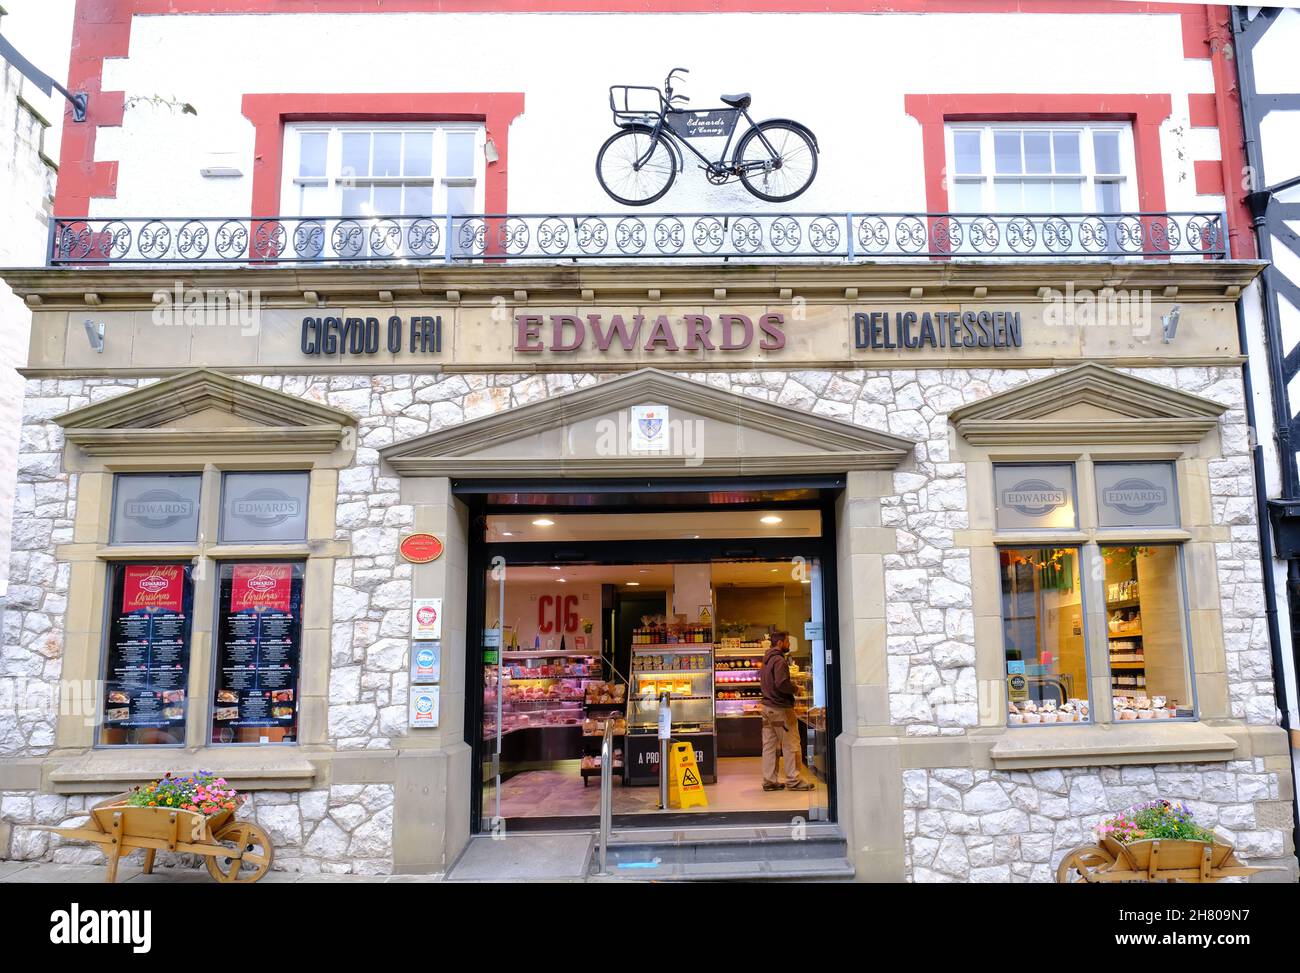 A delicatessan store in Conway town centre with an open doorway and bicycle decorating the facade. Stock Photo